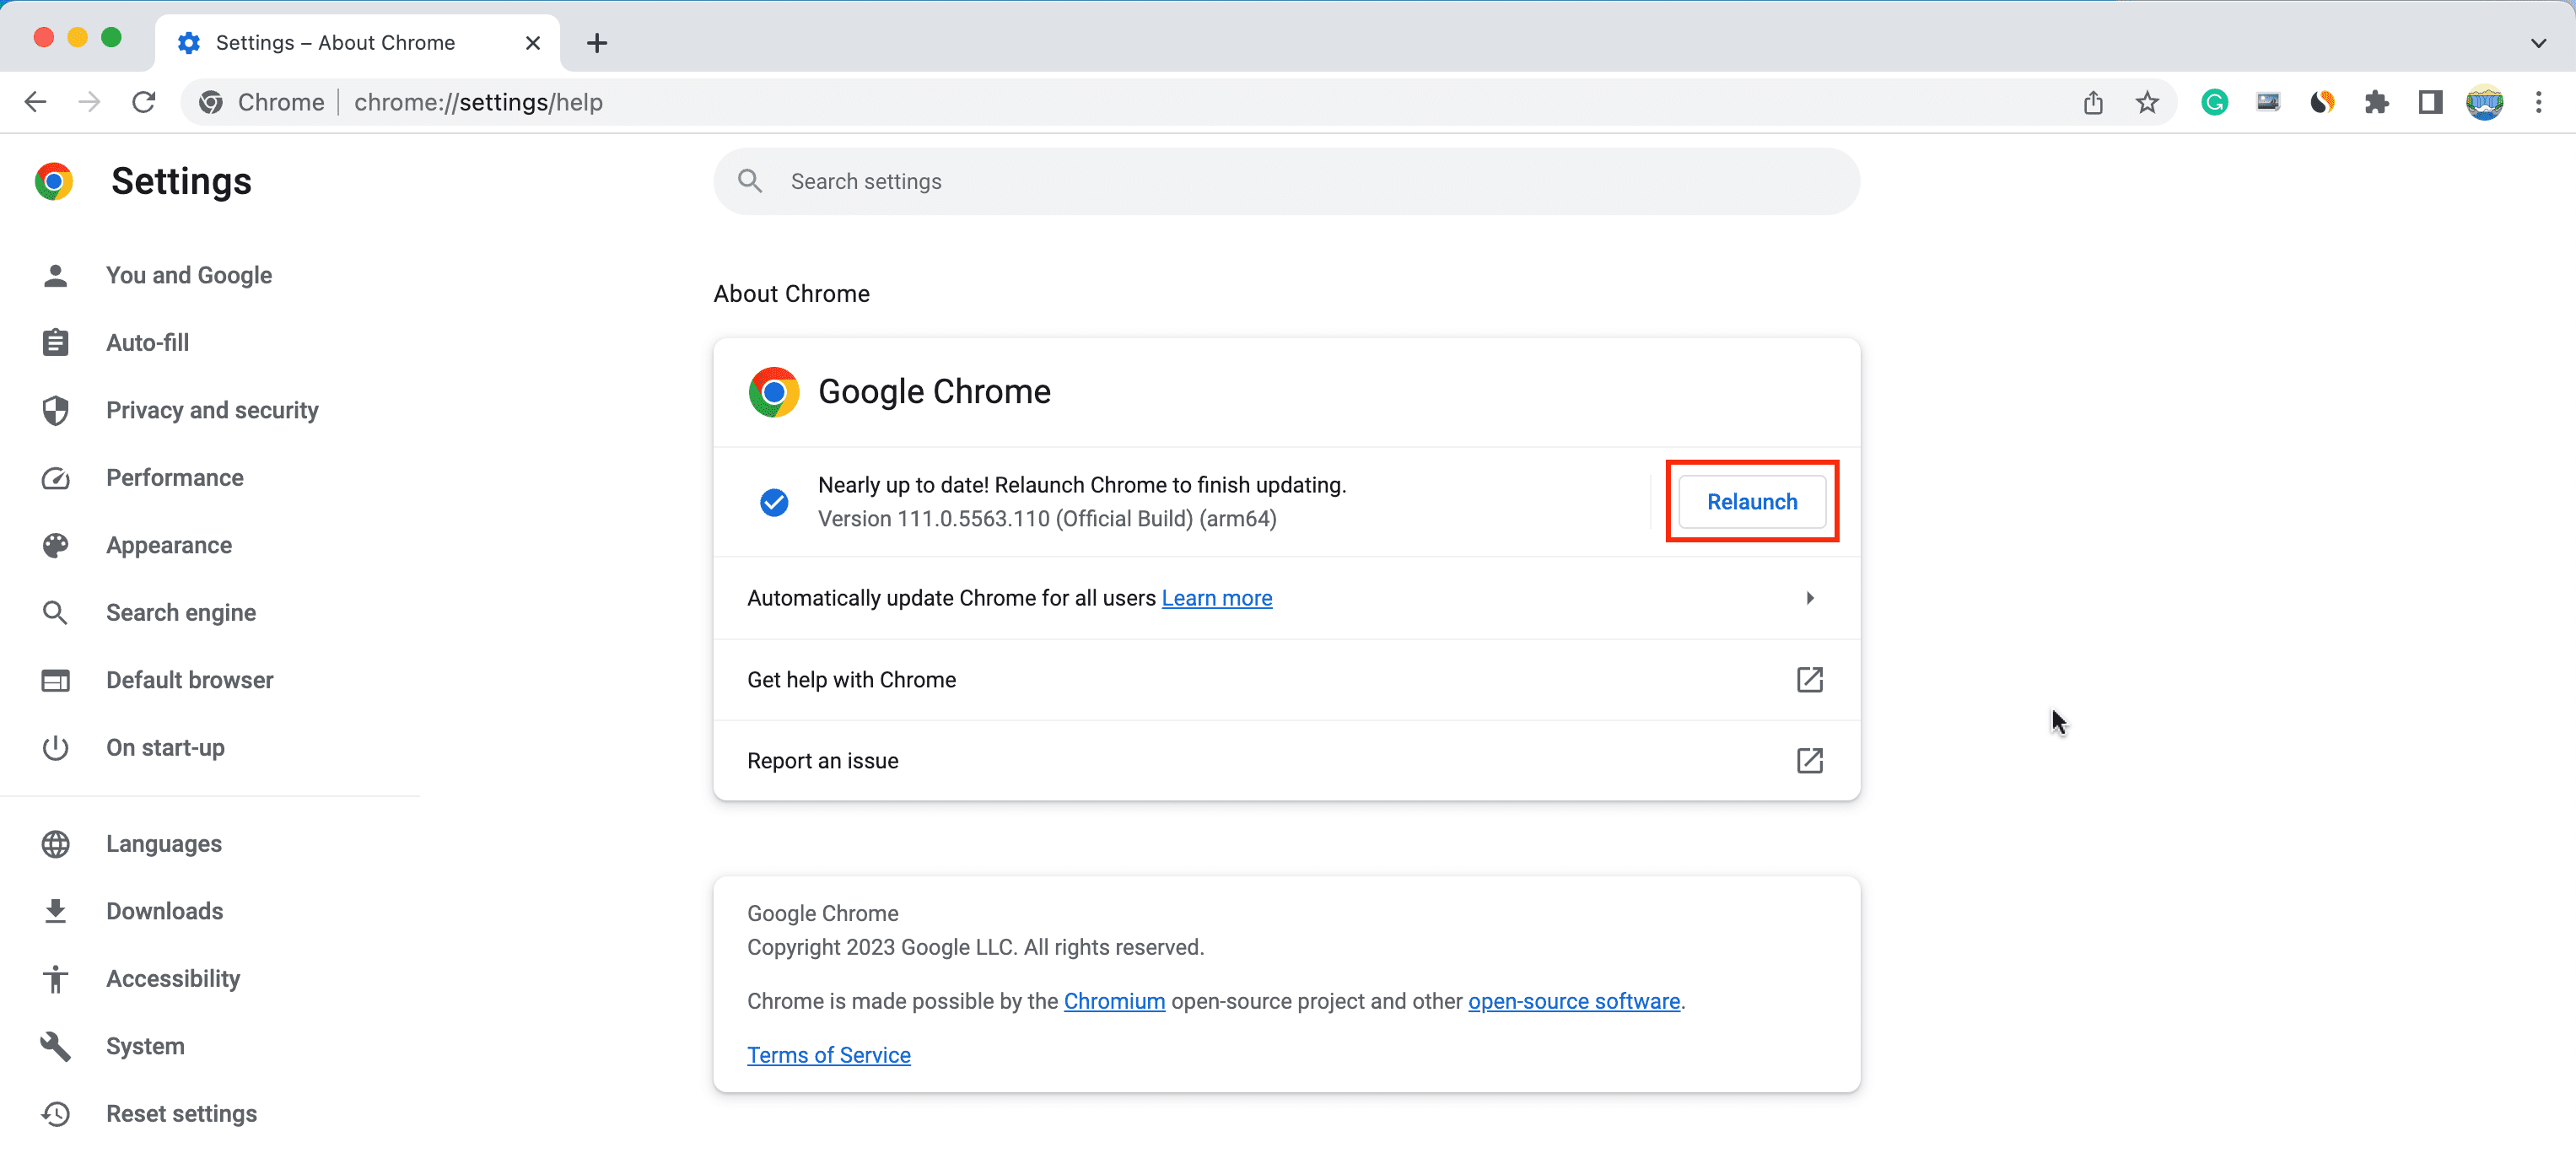 How to manually force Google Chrome to immediately update itself